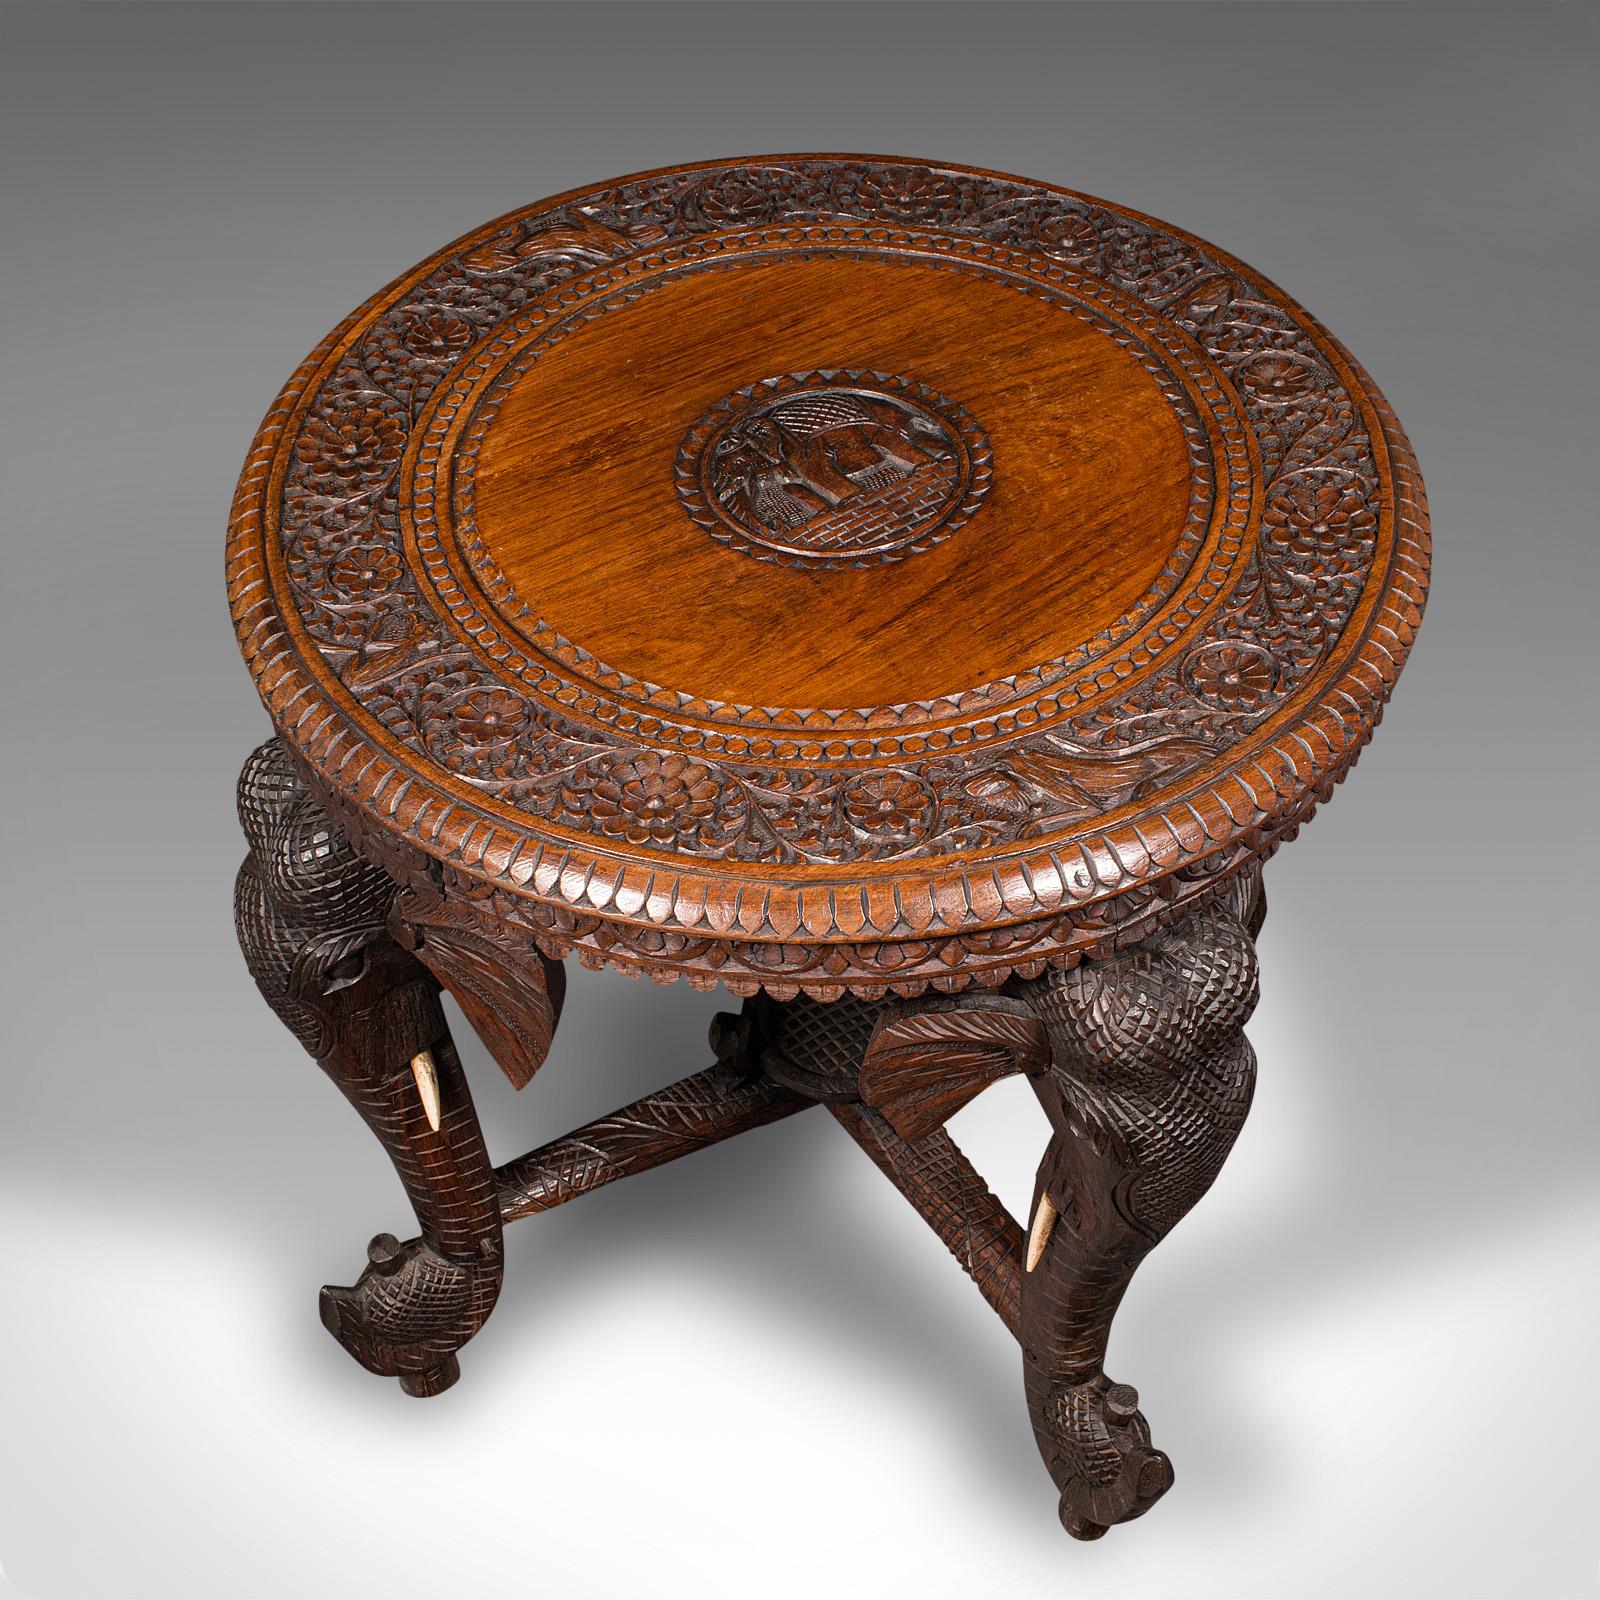 Antique Occasional Table, Indian Teak, Carved, Coffee, Elephants, Late Victorian 1